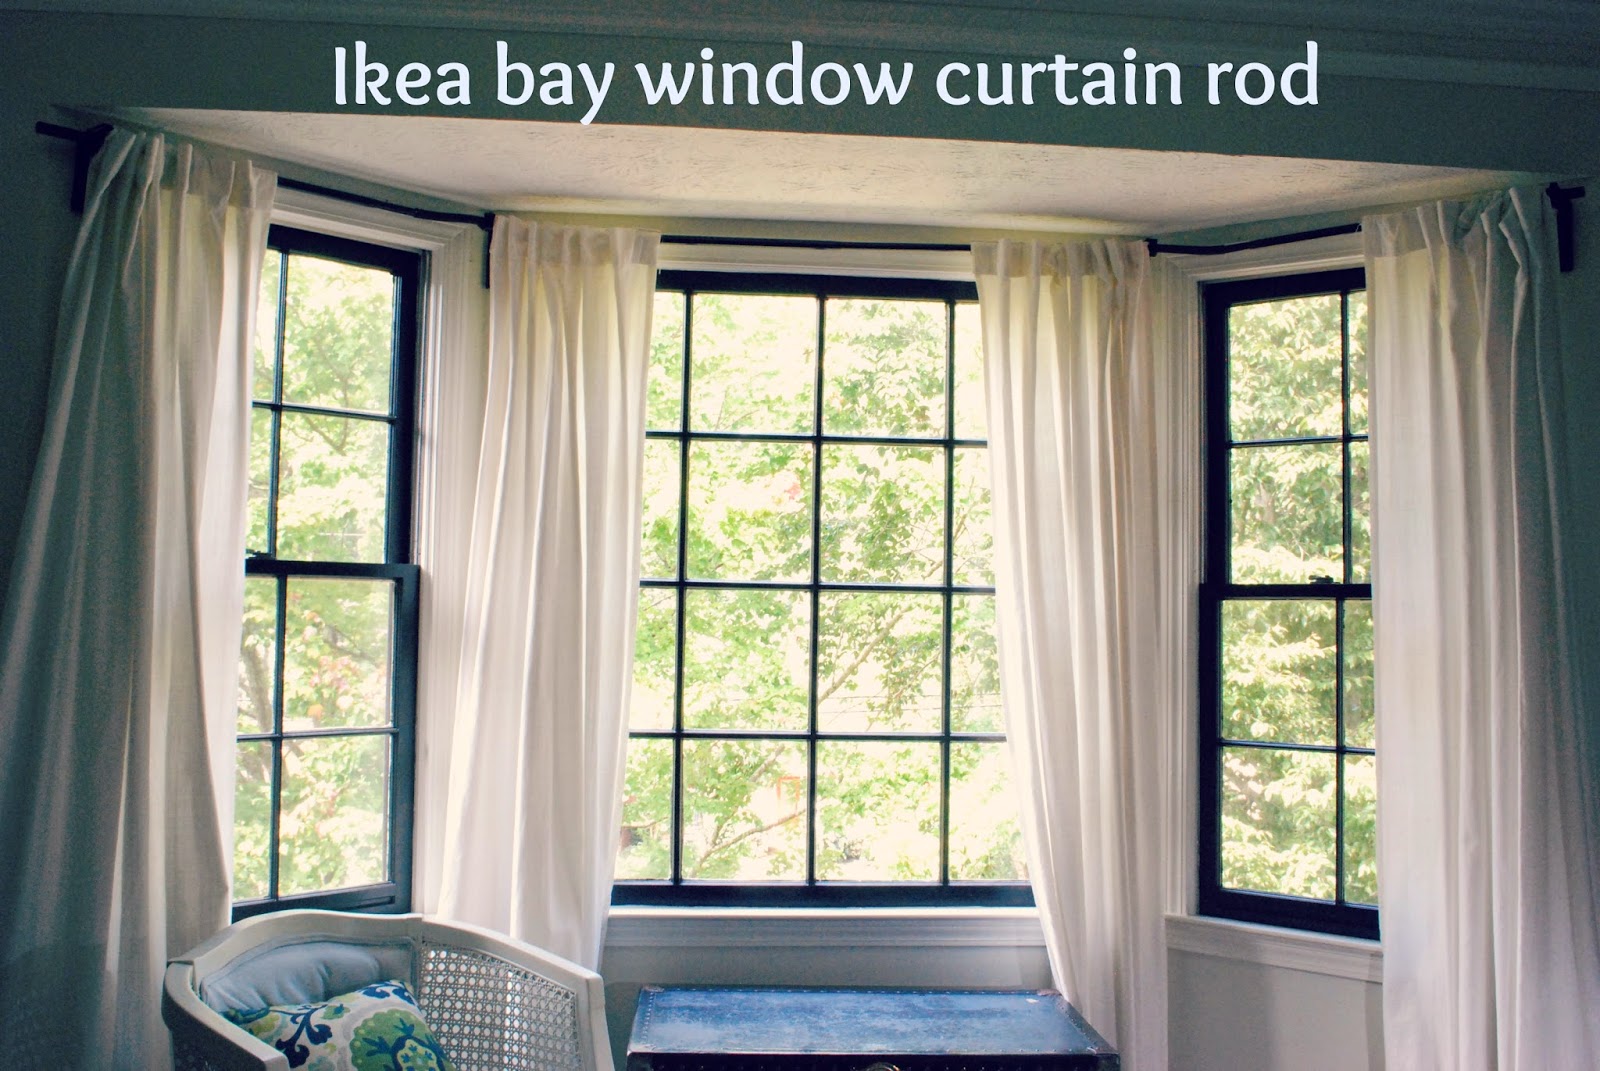 Between Blue and Yellow: Bay window curtain rod